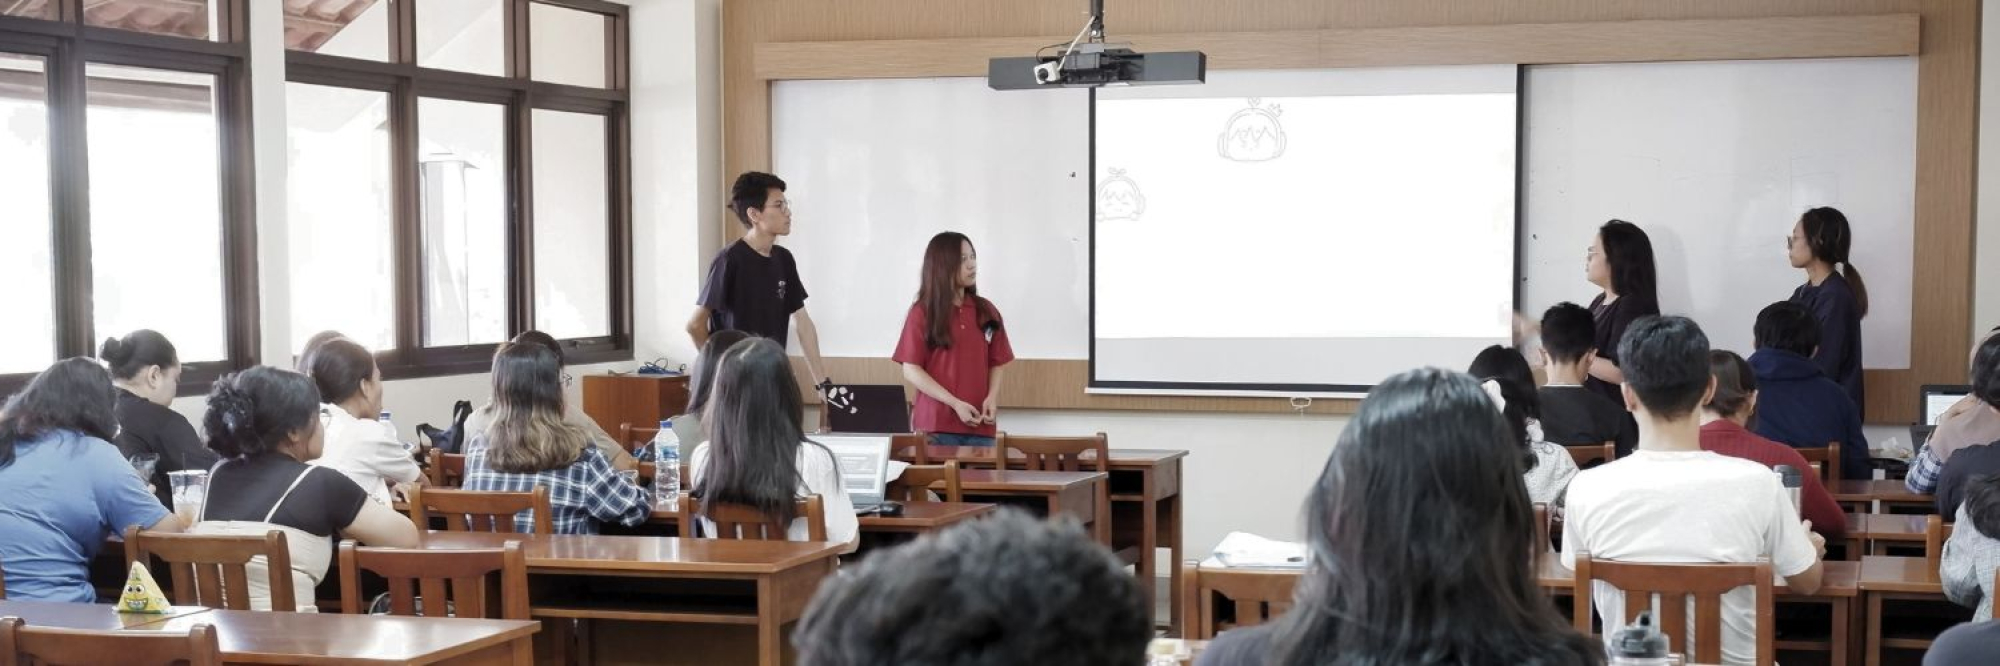 Students Presenting their Ideas in a Class